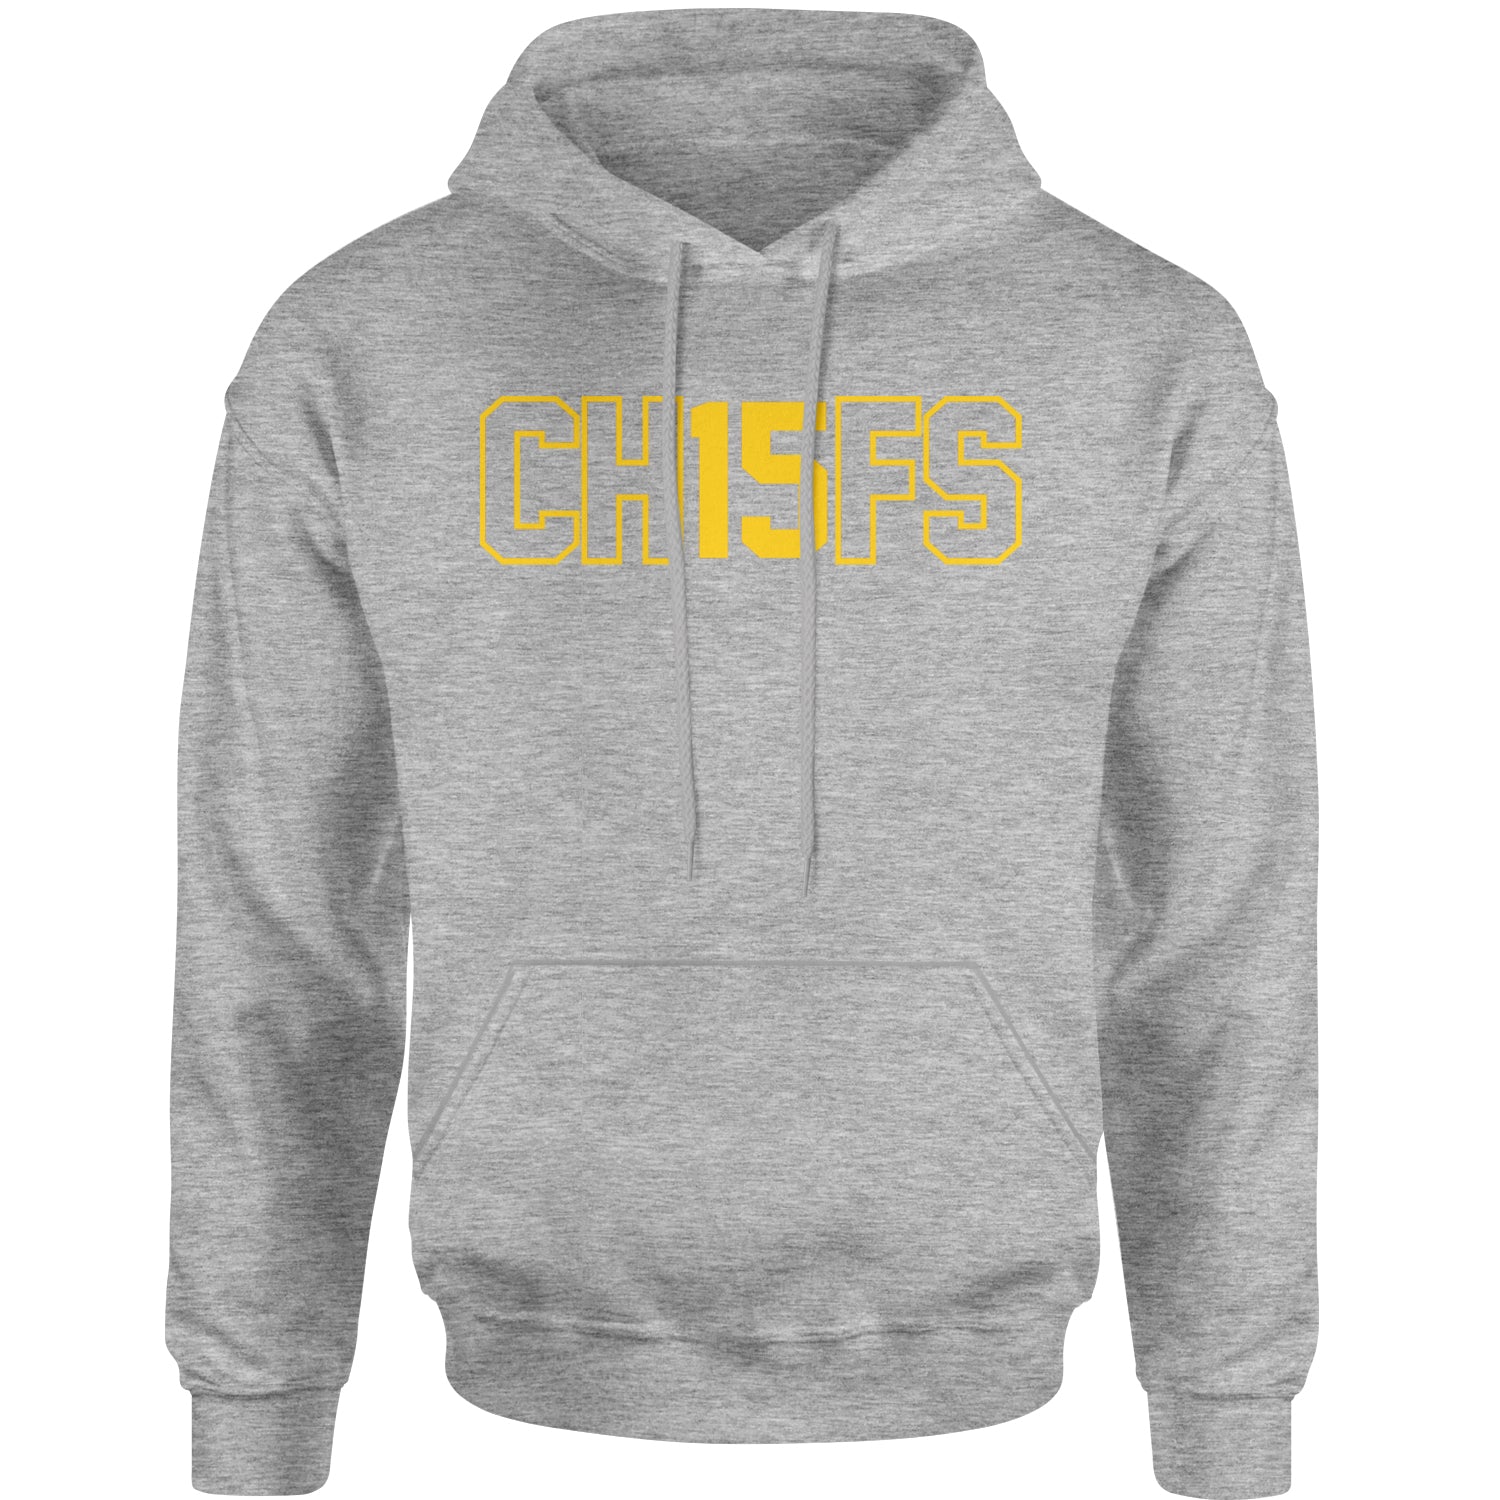 Ch15fs Chief 15 Shirt Adult Hoodie Sweatshirt ass, big, burrowhead, game, kelce, know, moutha, my, nd, patrick, role, shut, sports, your by Expression Tees